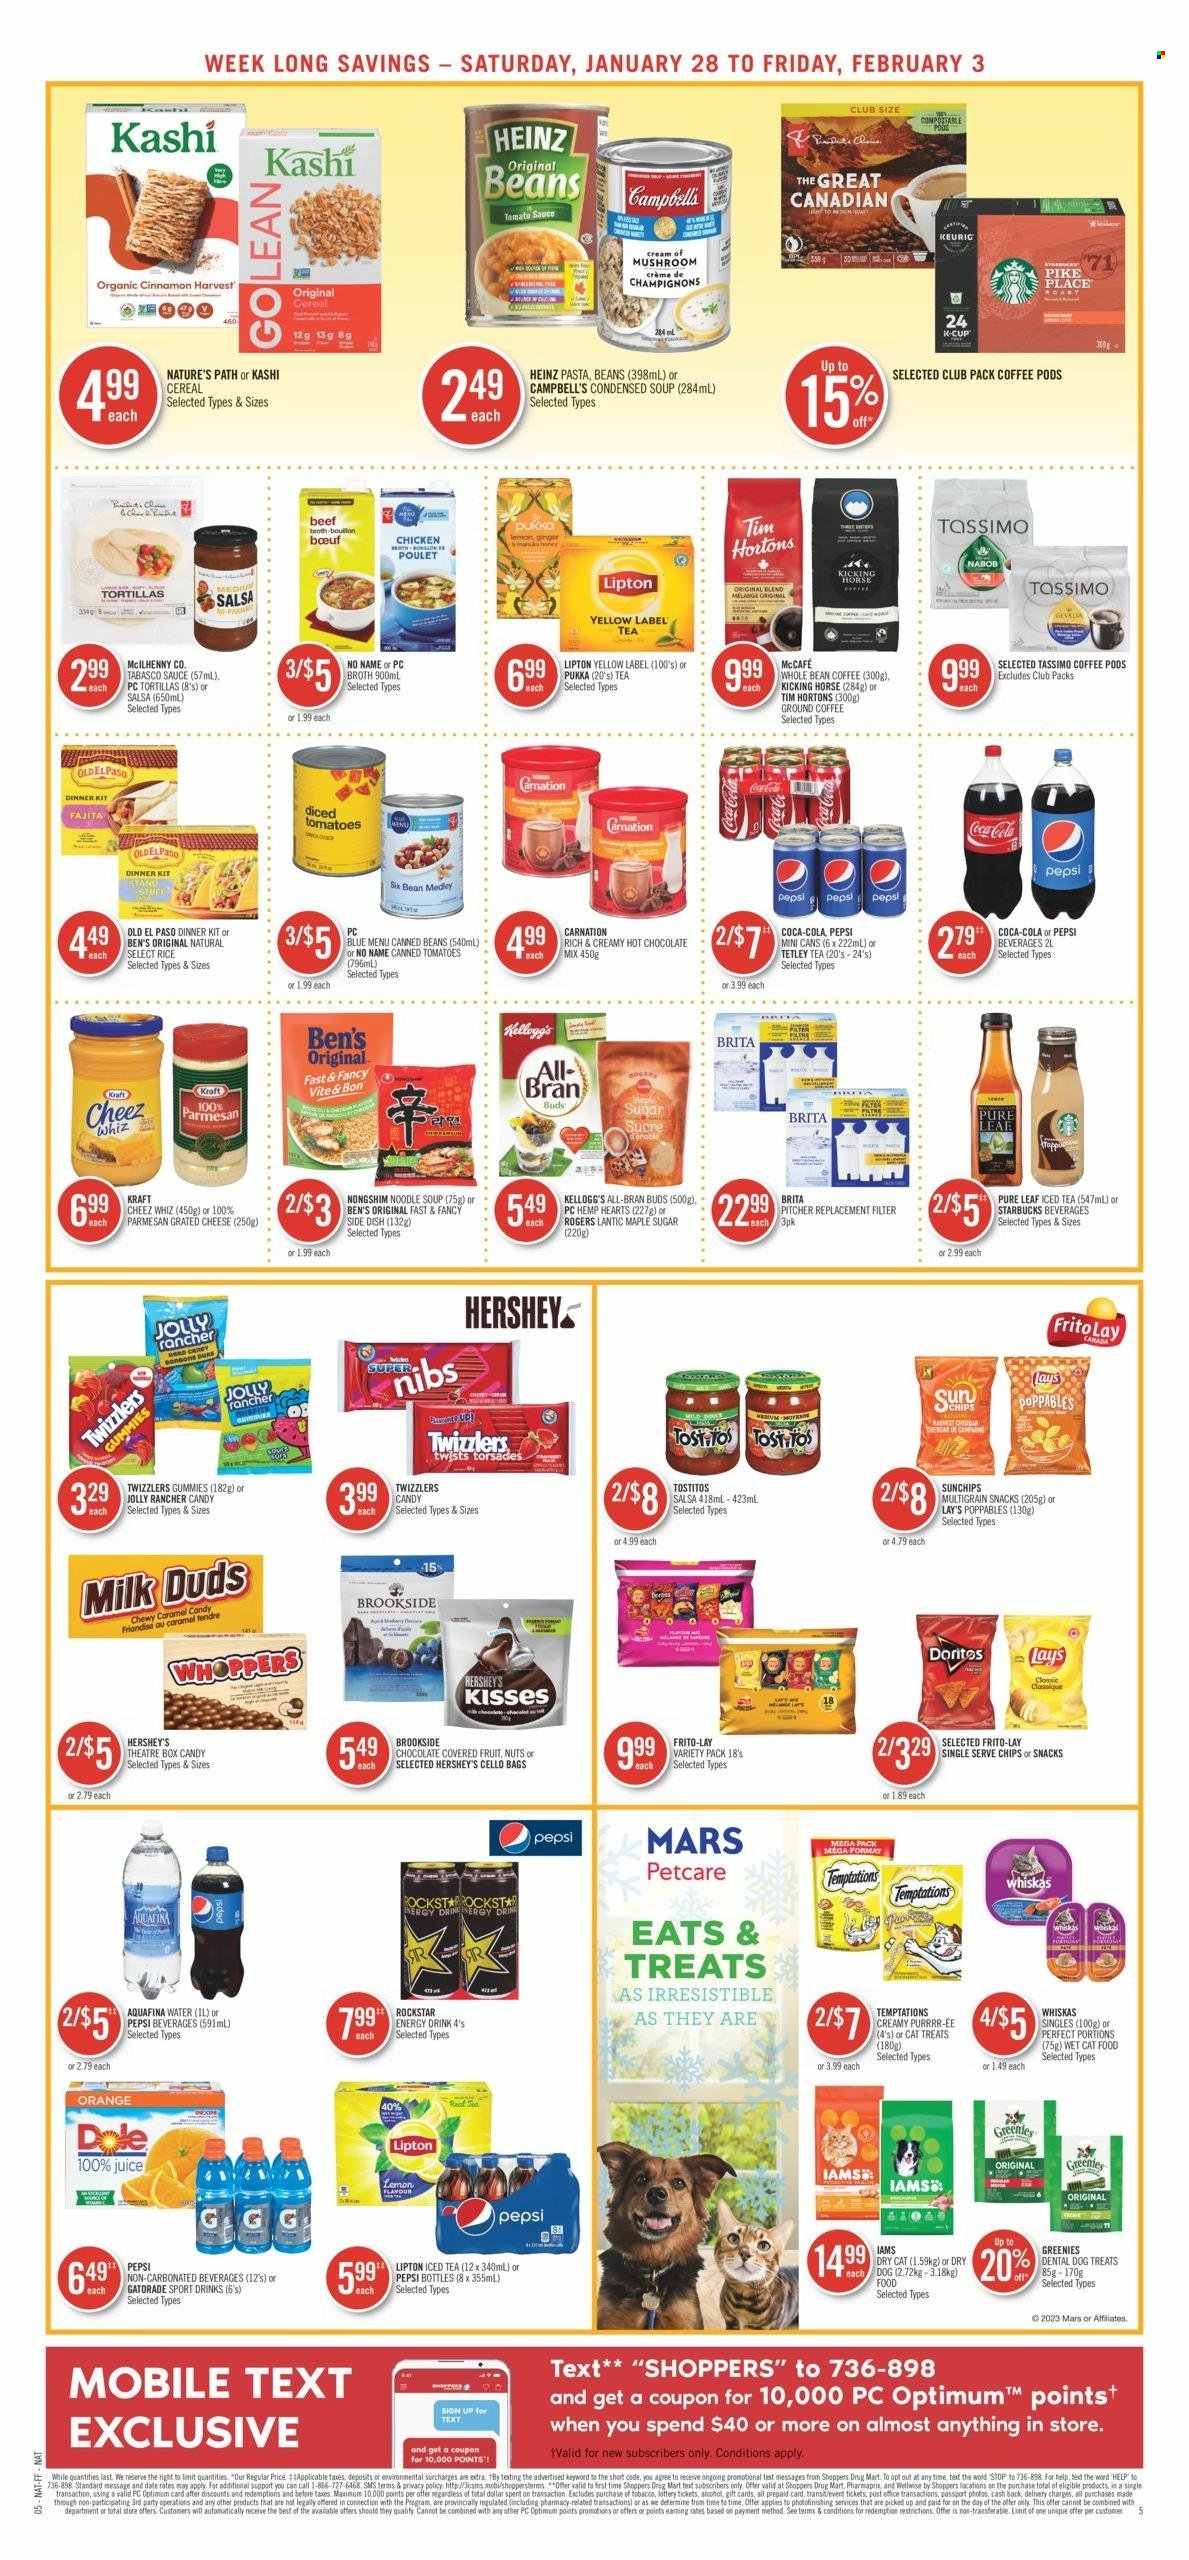 thumbnail - Shoppers Drug Mart Flyer - January 28, 2023 - February 03, 2023 - Sales products - tortillas, Old El Paso, No Name, Campbell's, condensed soup, soup, pasta, noodles cup, dinner kit, fajita, noodles, instant soup, Kraft®, parmesan, grated cheese, Hershey's, Milk Duds, Mars, Kellogg's, Doritos, chips, Lay’s, Frito-Lay, Tostitos, sugar, tabasco, broth, tomato sauce, diced tomatoes, cereals, All-Bran, rice, cinnamon, salsa, Coca-Cola, Pepsi, juice, energy drink, ice tea, Rockstar, Gatorade, Aquafina, hot chocolate, Pure Leaf, coffee, coffee pods, ground coffee, coffee capsules, Starbucks, McCafe, K-Cups, Keurig, bag, pitcher, animal food, cat food, Optimum, Greenies, Iams, wet cat food, alcohol, Heinz, Lipton, Whiskas. Page 8.